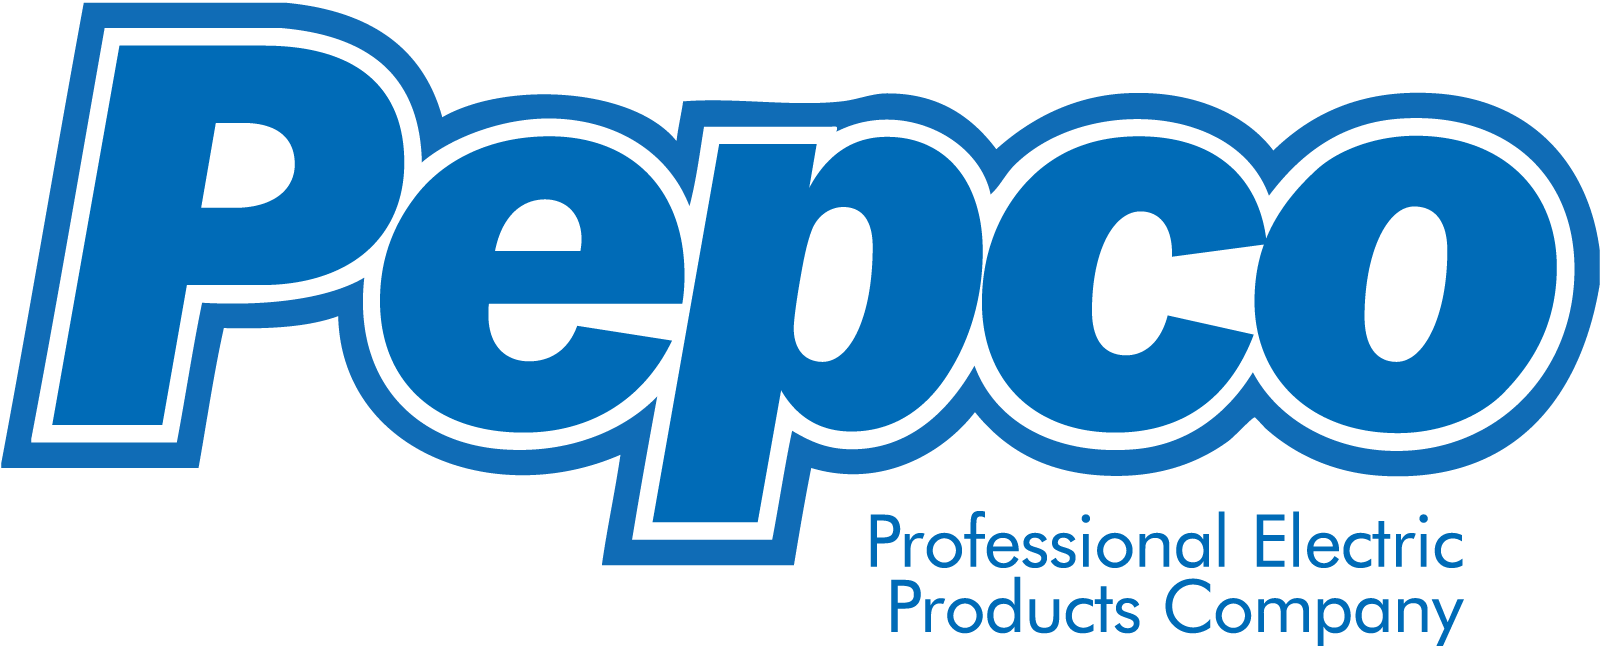 Pepco Logo - Home Professional Electric Products, Akron